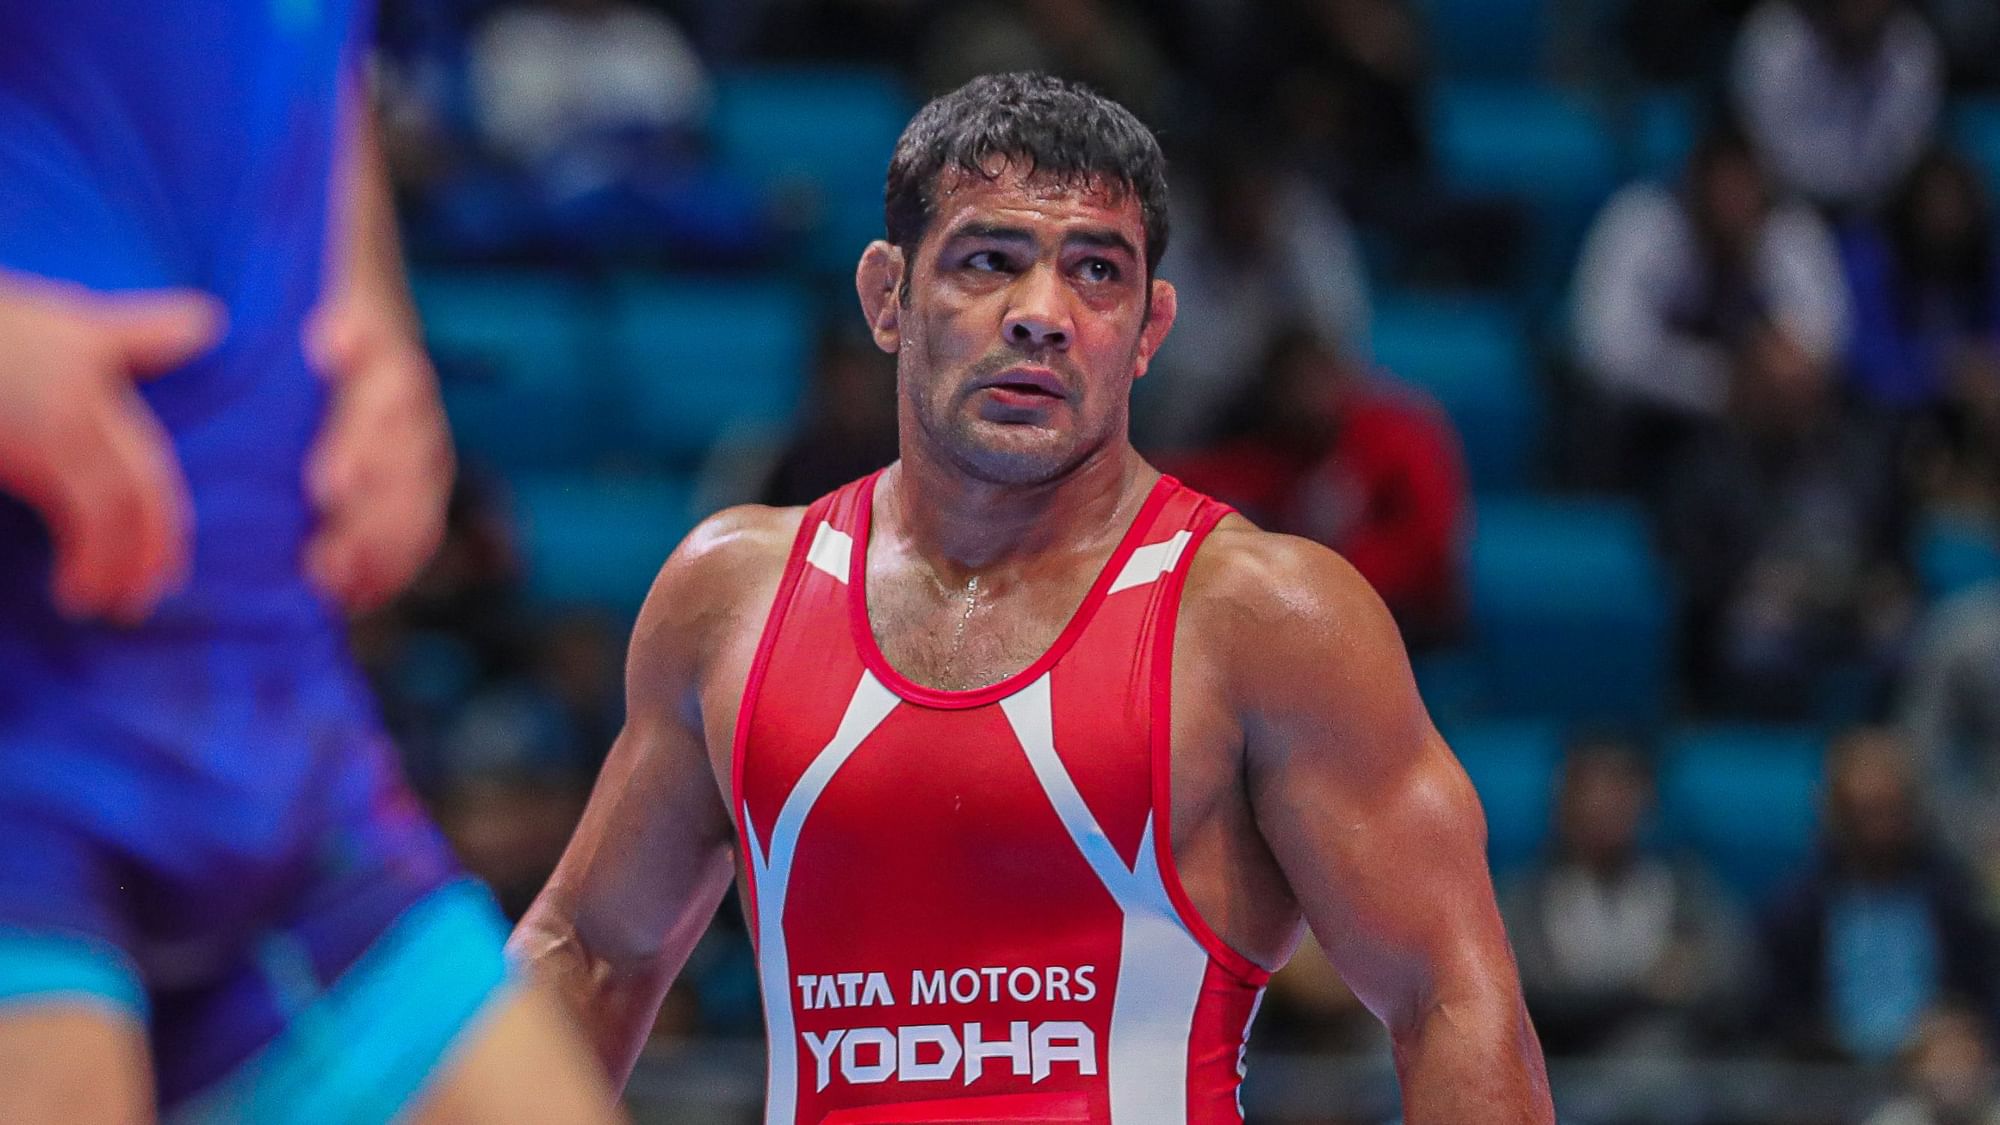 Sushil Kumar has confirmed he will be training to compete in the 2021 Tokyo Olympics.